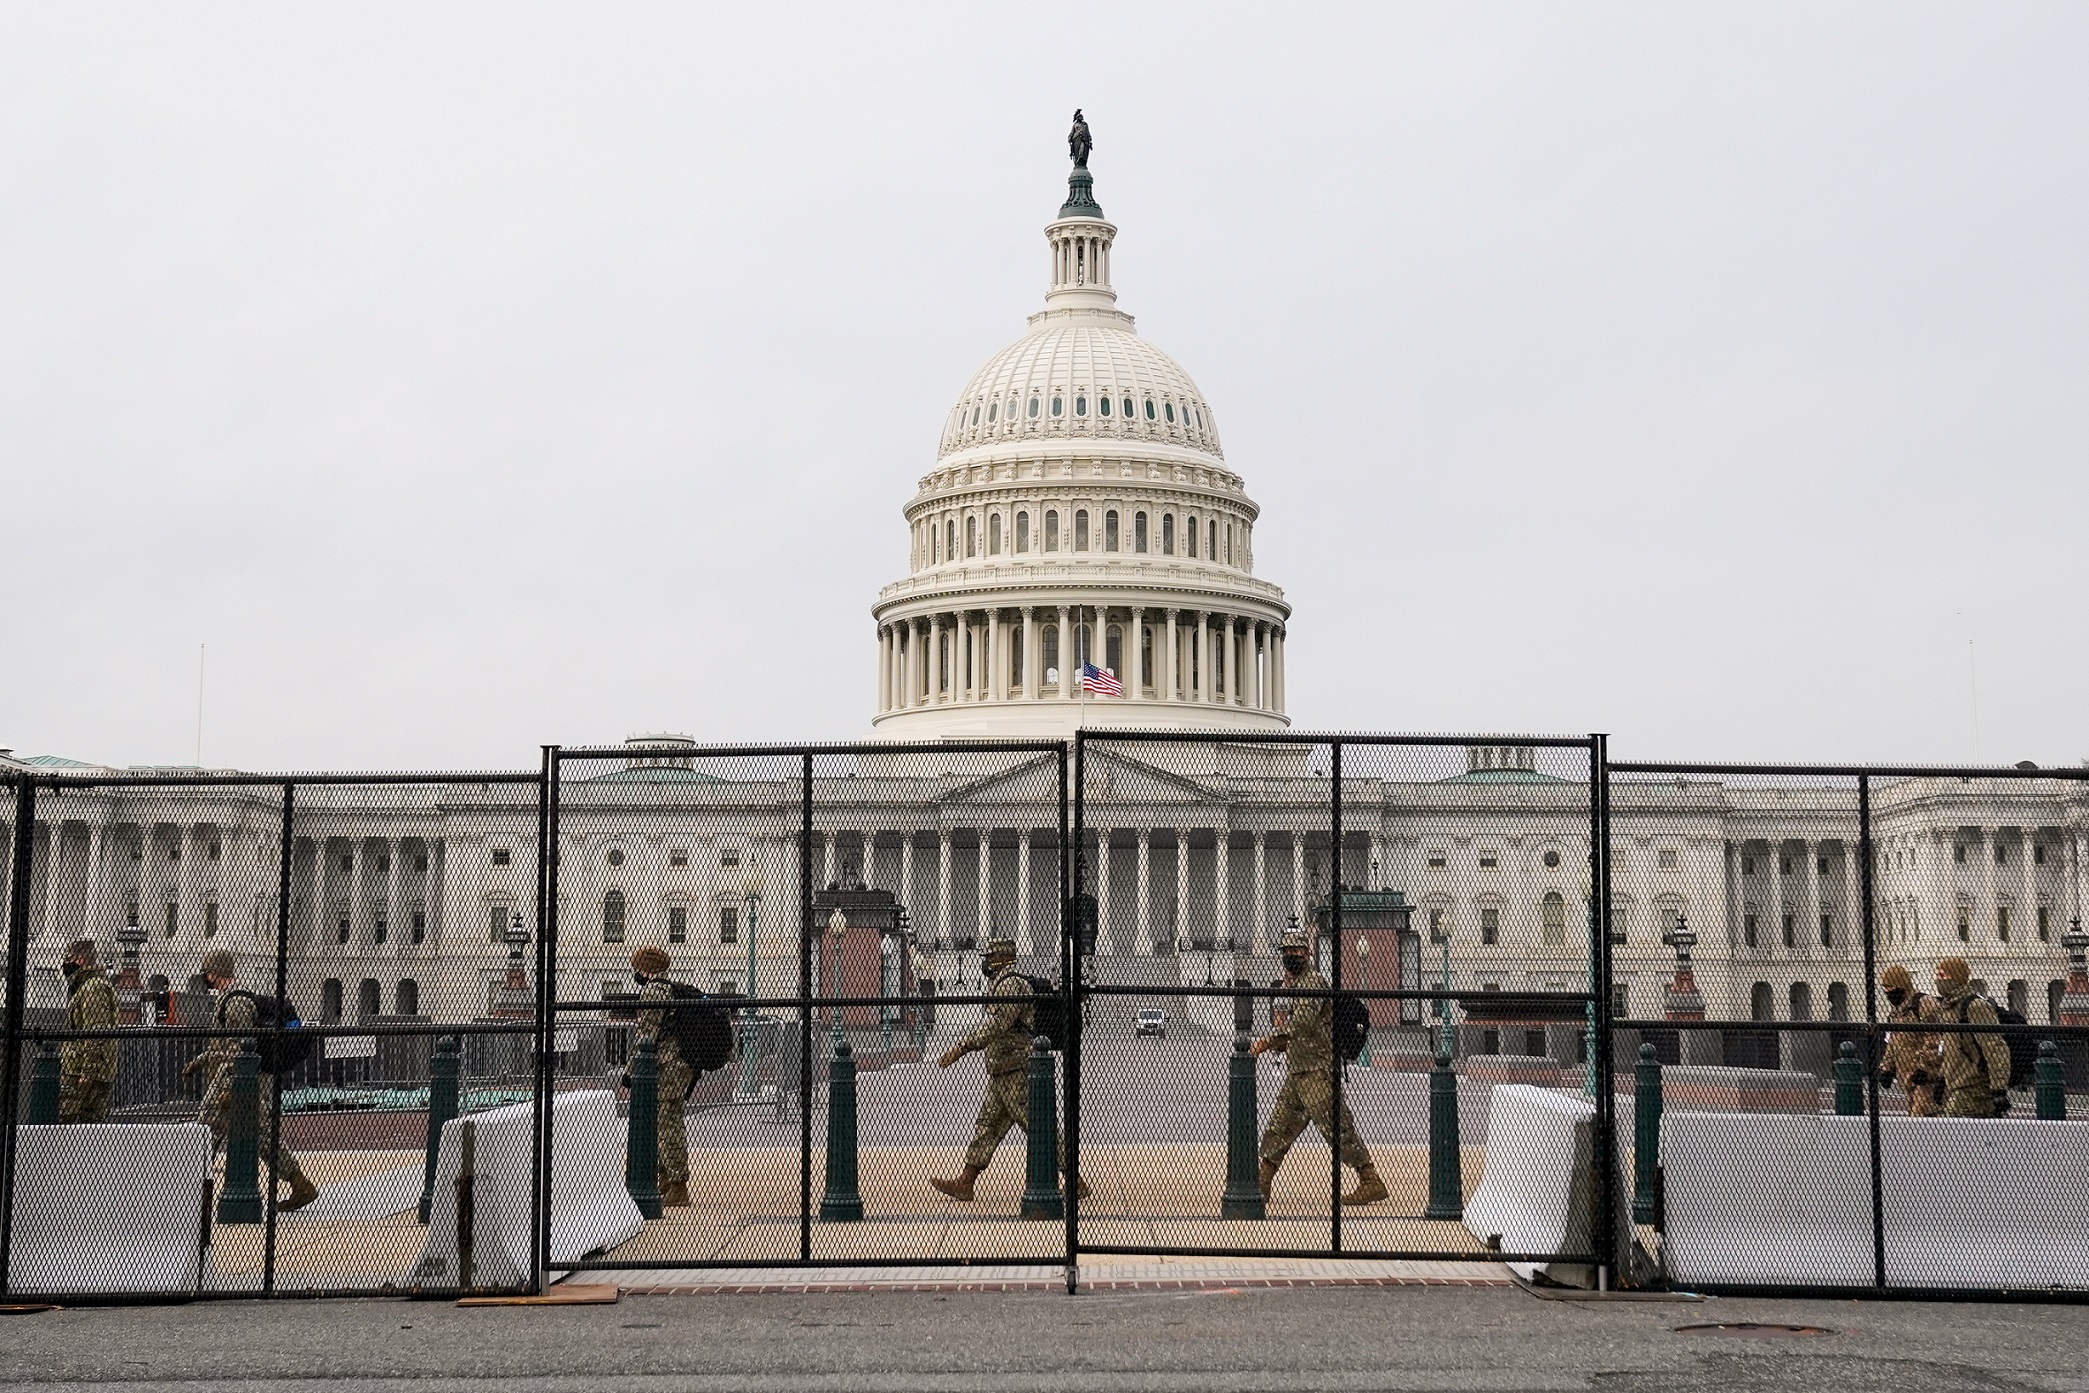 Security fencing surrounds the U.S. Capitol days after supporters of U.S. President Donald Trump stormed the Capitol in Washington